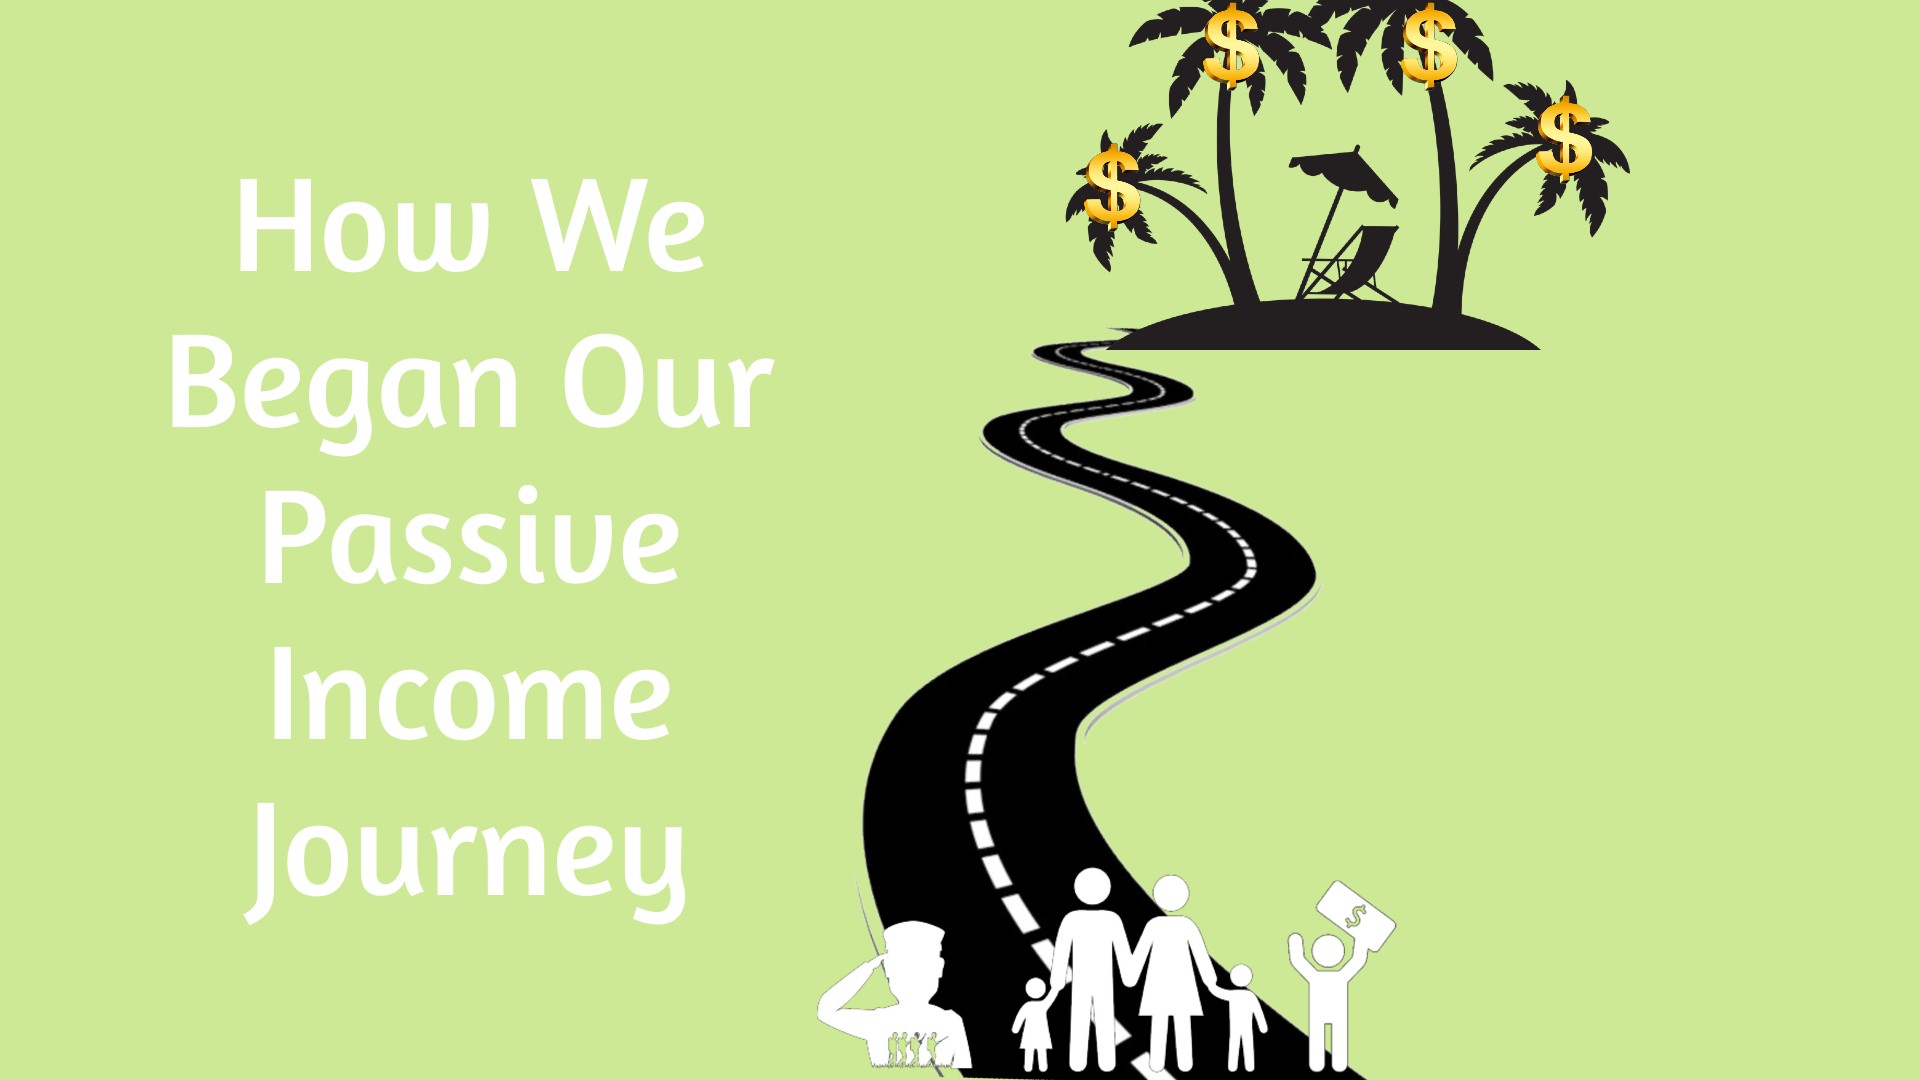 How We Began our Passive Income Journey